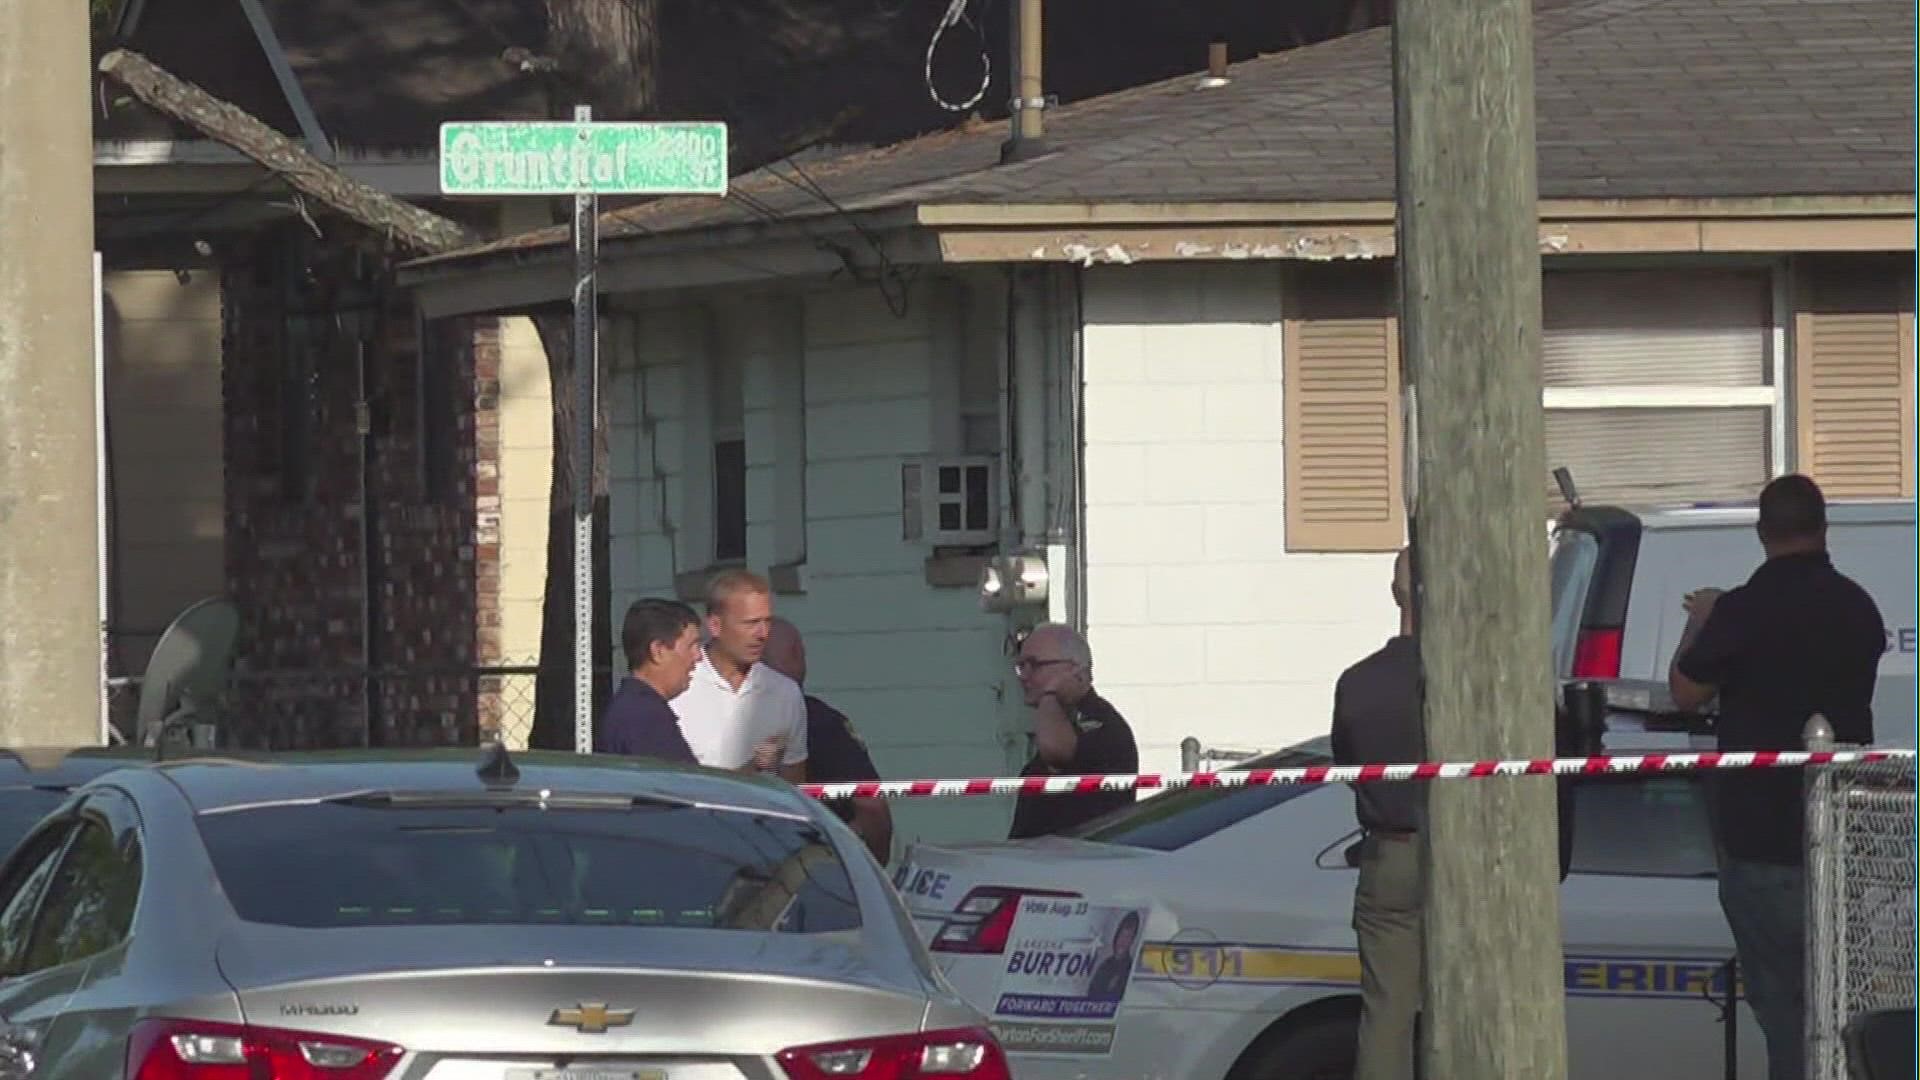 The officer was not injured. The suspect has been rushed to the hospital, according to JSO.